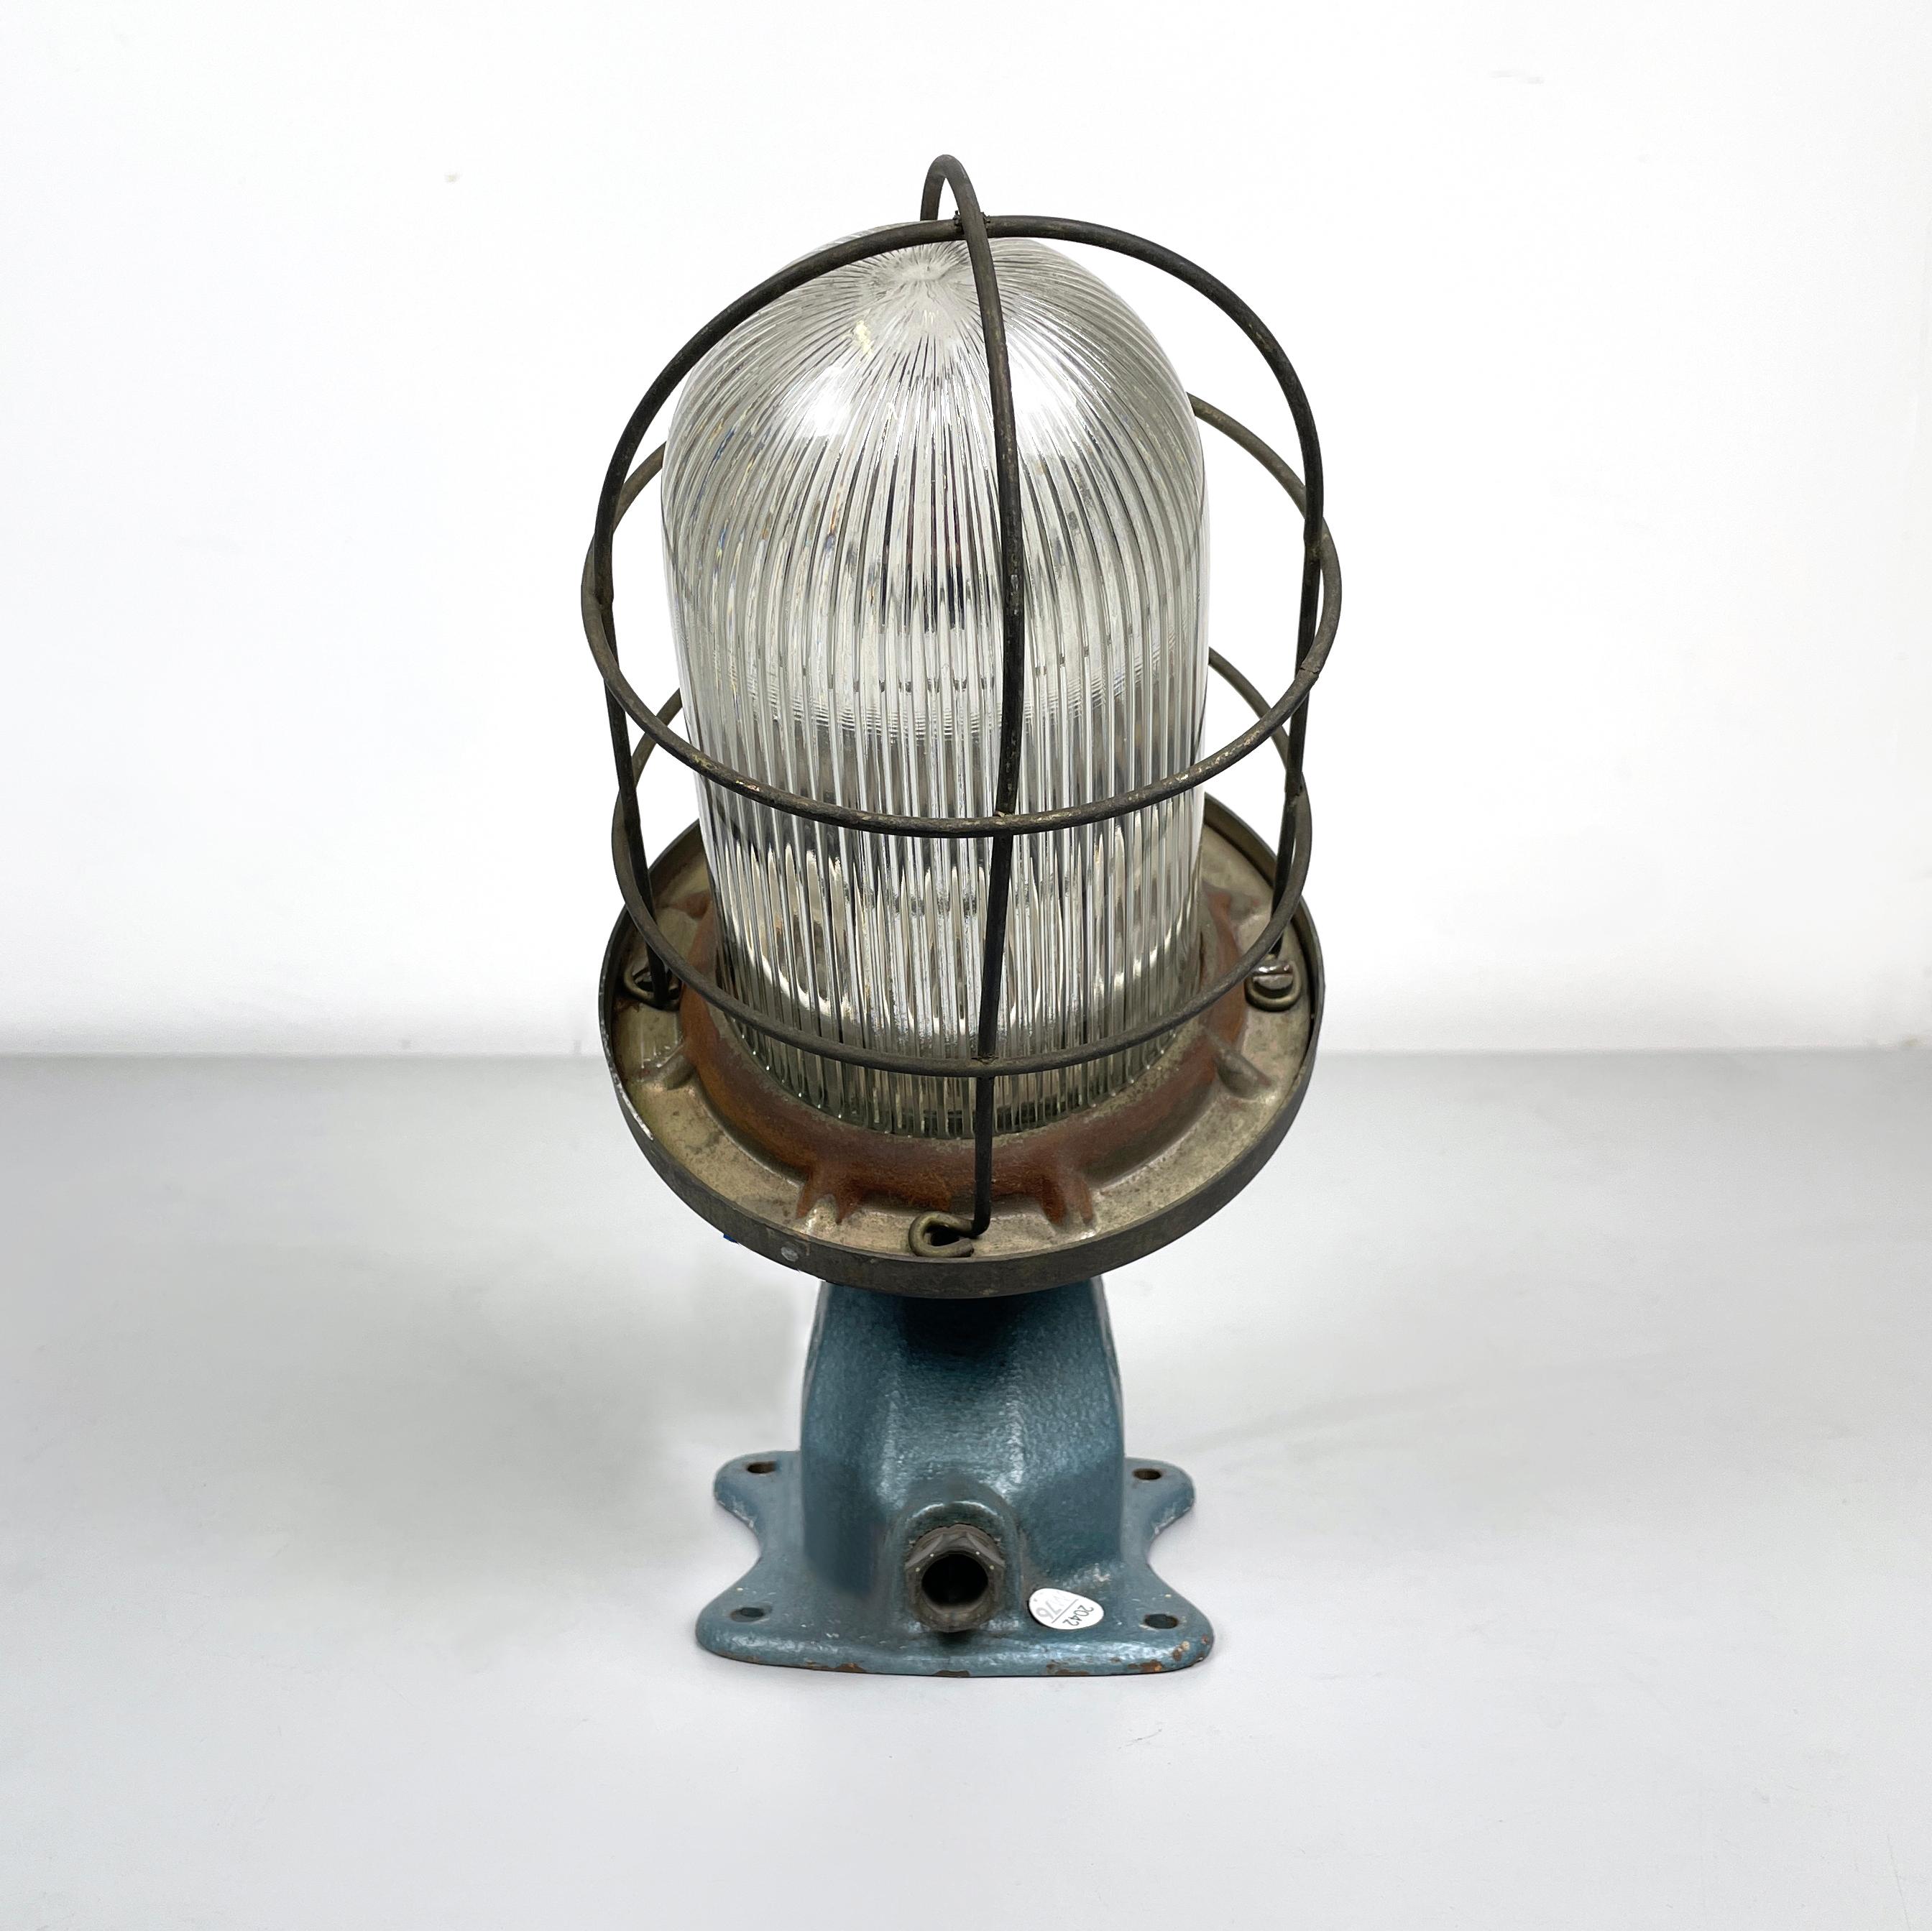 Italian mid-century modern Industrial wall lamp  in metal, 1960s
Industrial wall lamp with grey-blue painted metal structure. The round base diffuser of the spotlight is made up of a bell-shaped metal cage.
This lamp came from 1960 approx.
Good